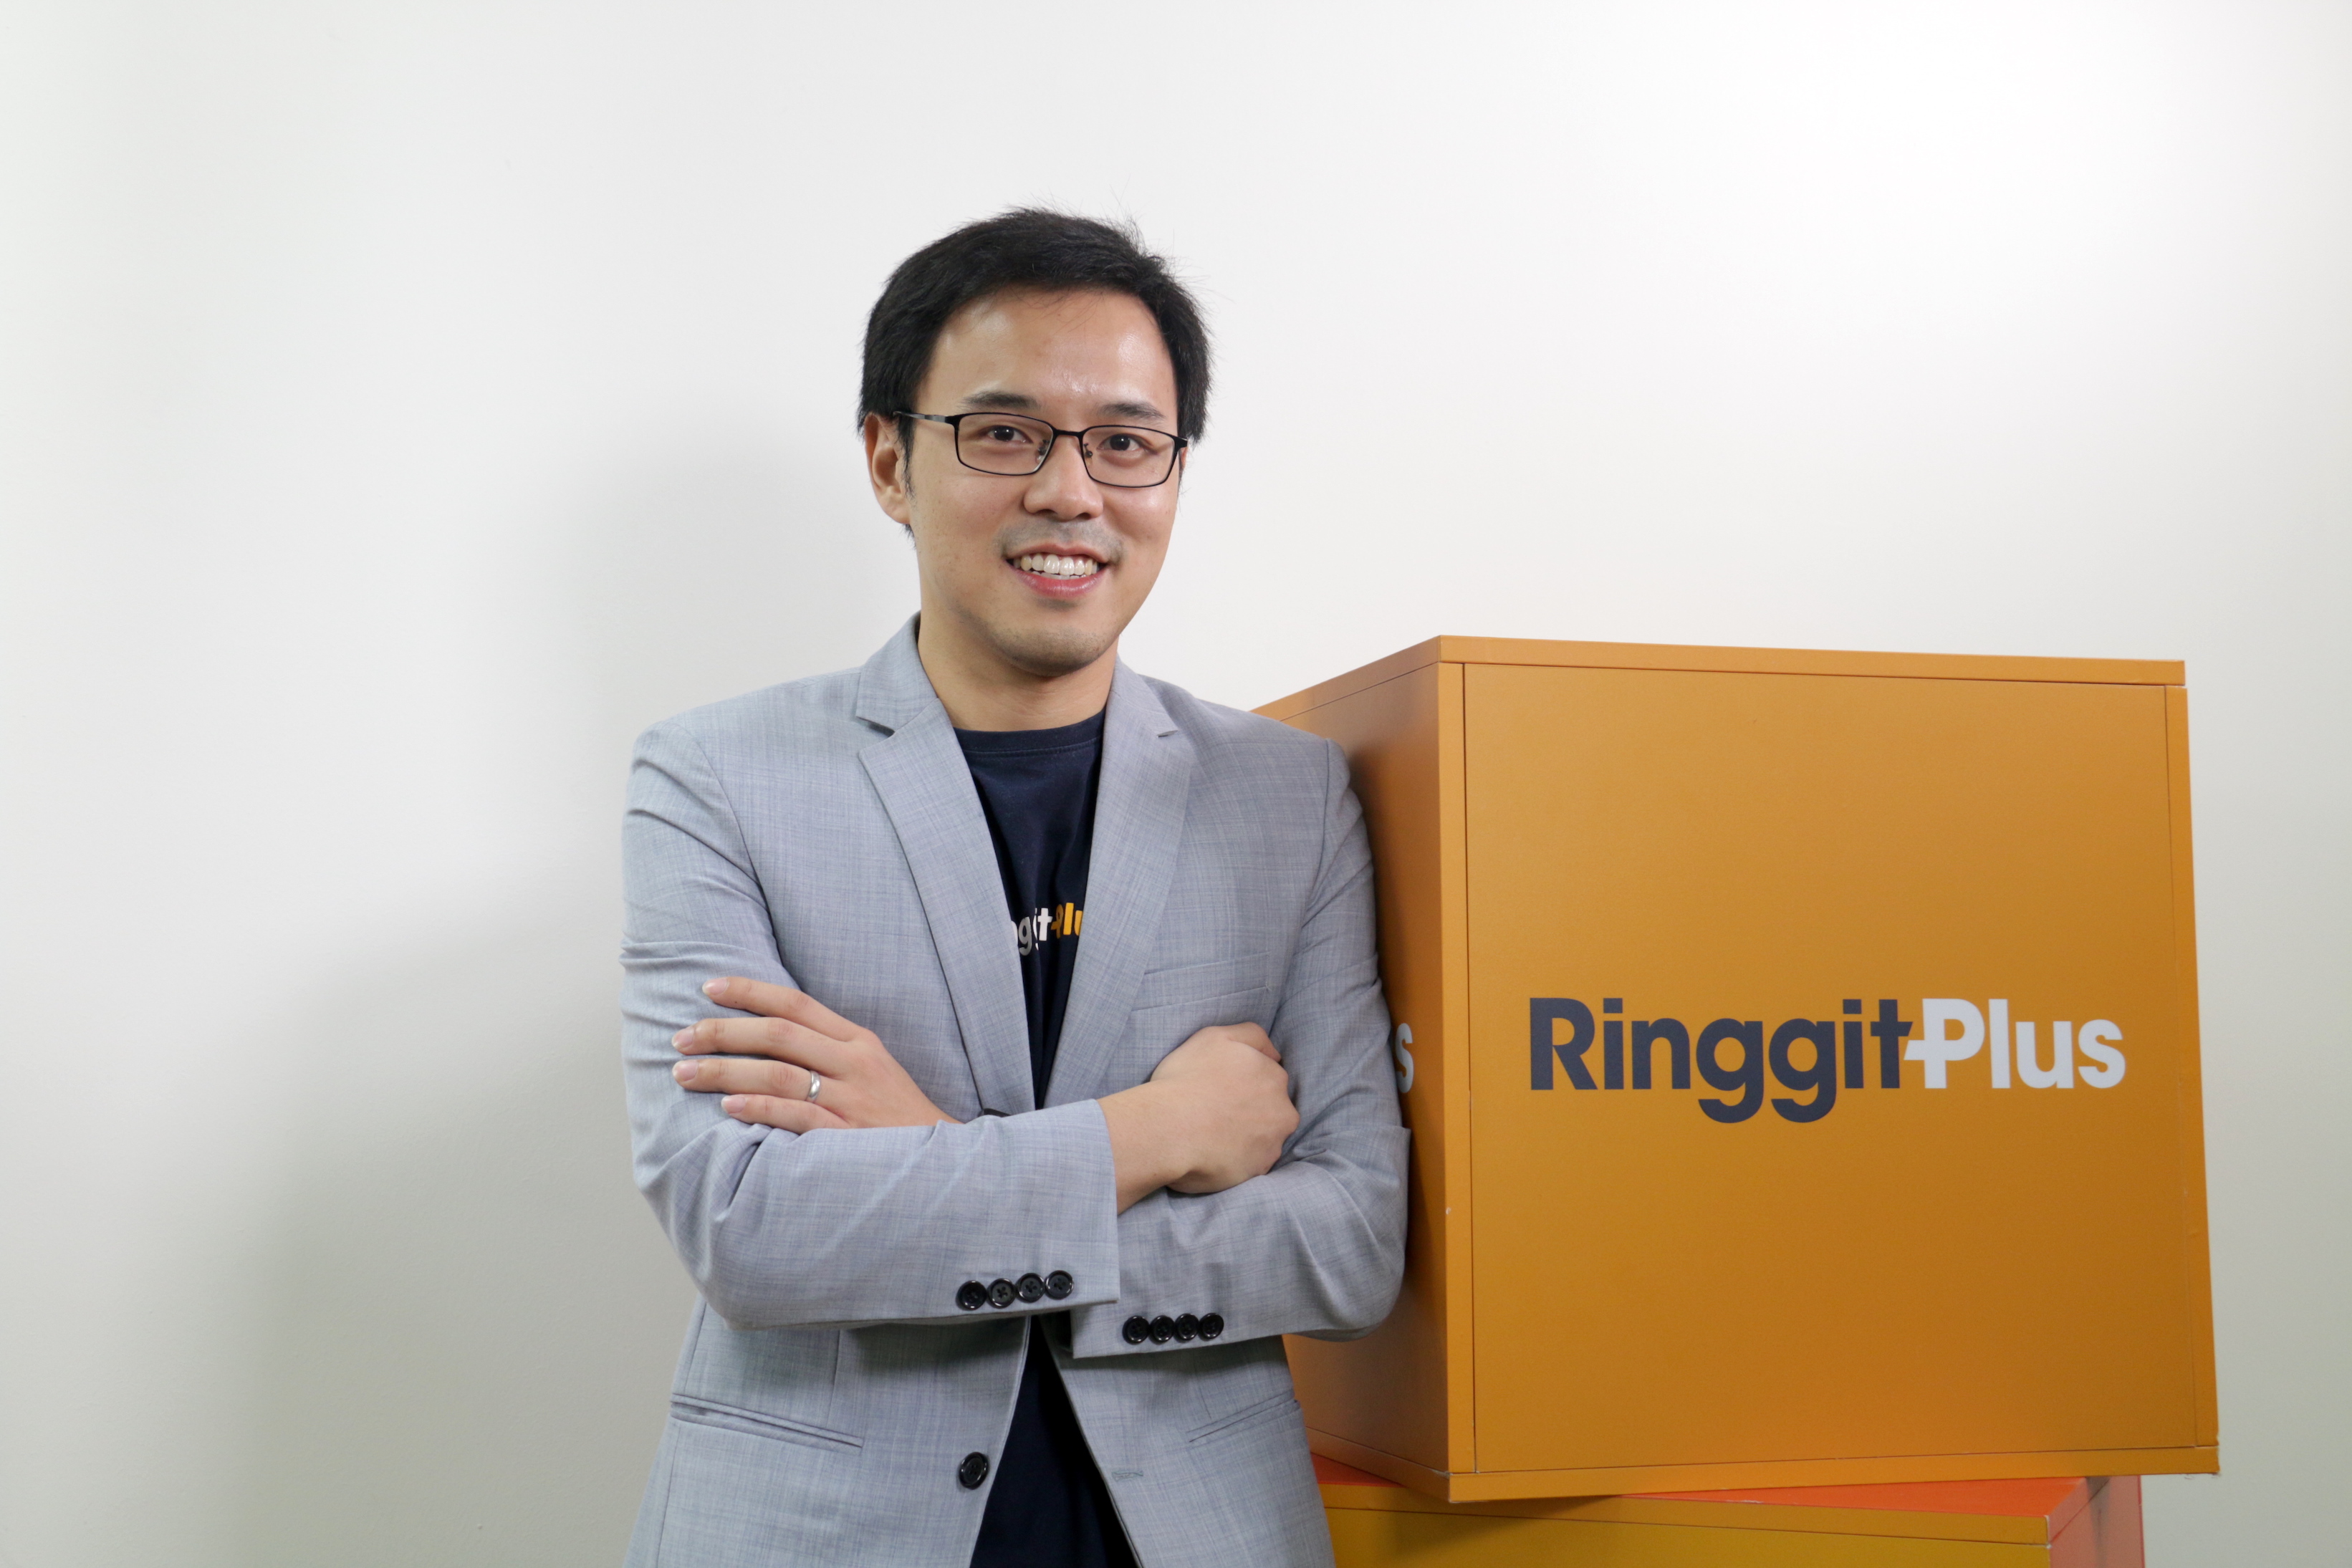 RinggitPlus offers digital one-to-one financial planning services